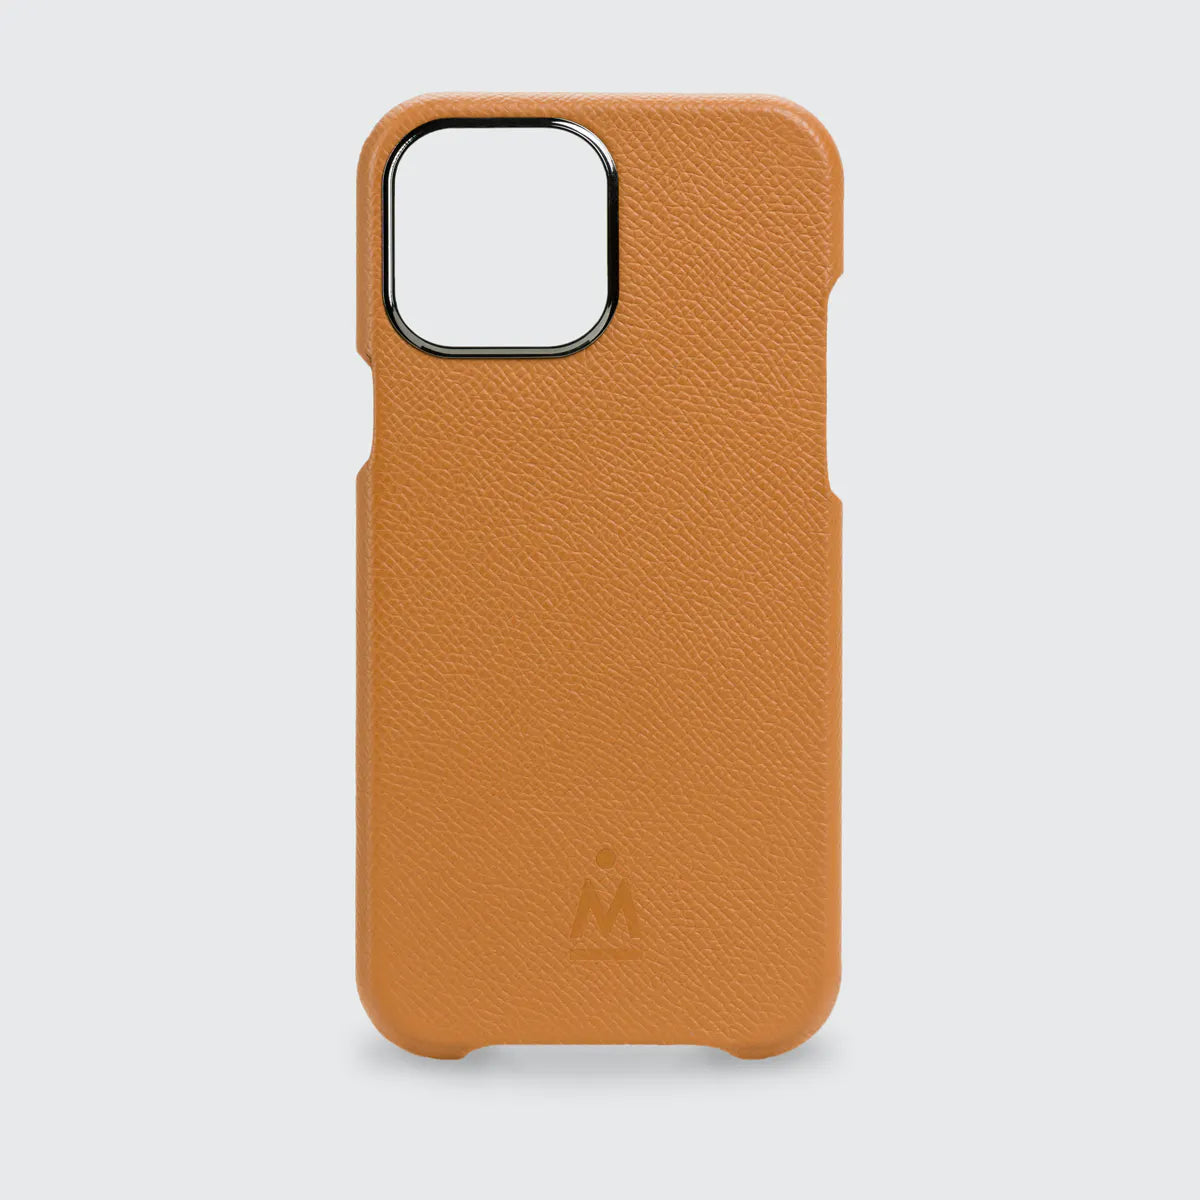 IPhone Case 13 Pro Max Whiskey Tan